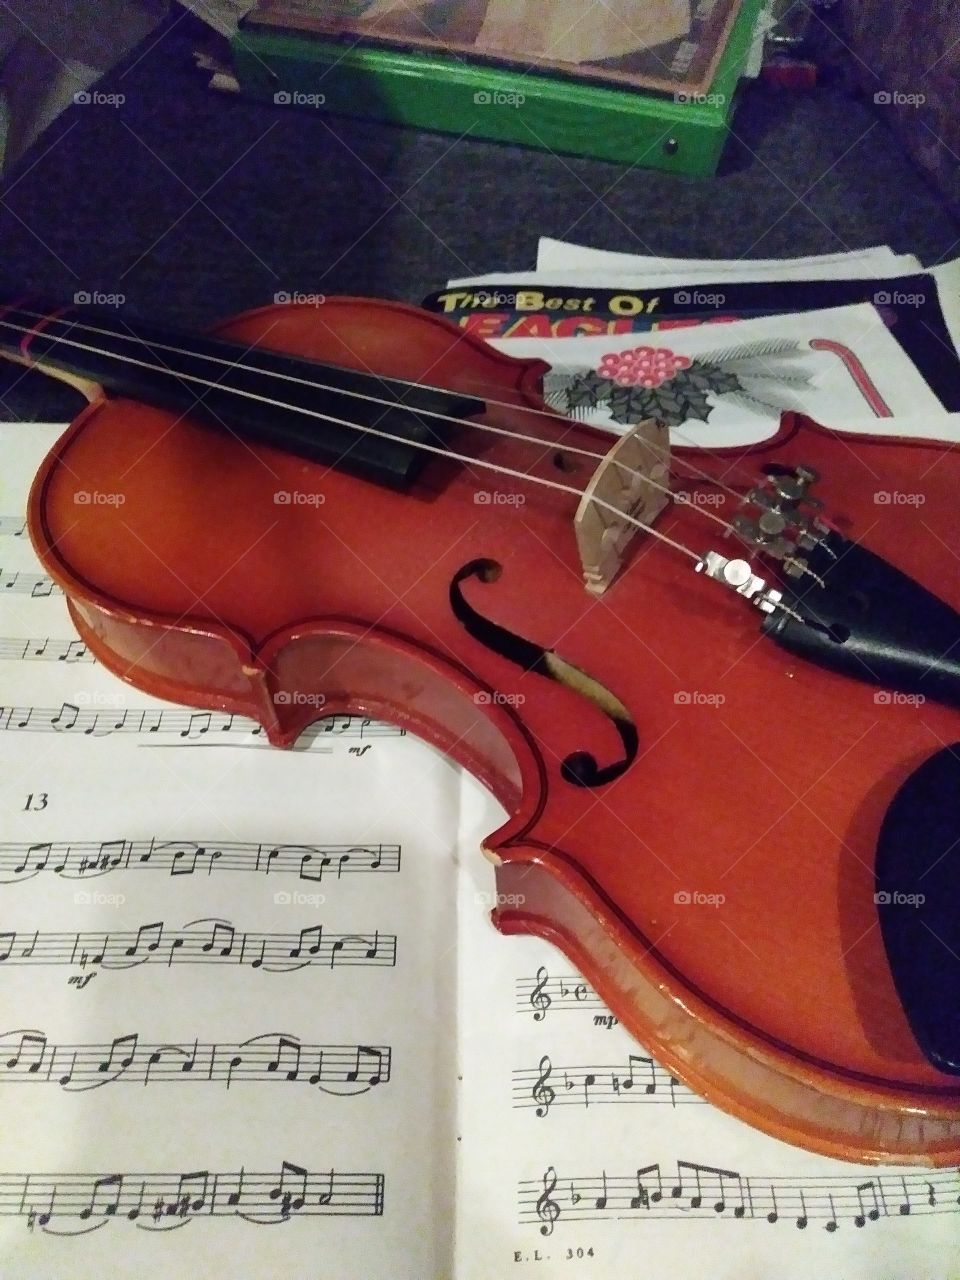 A violin is an instrument of history and music.